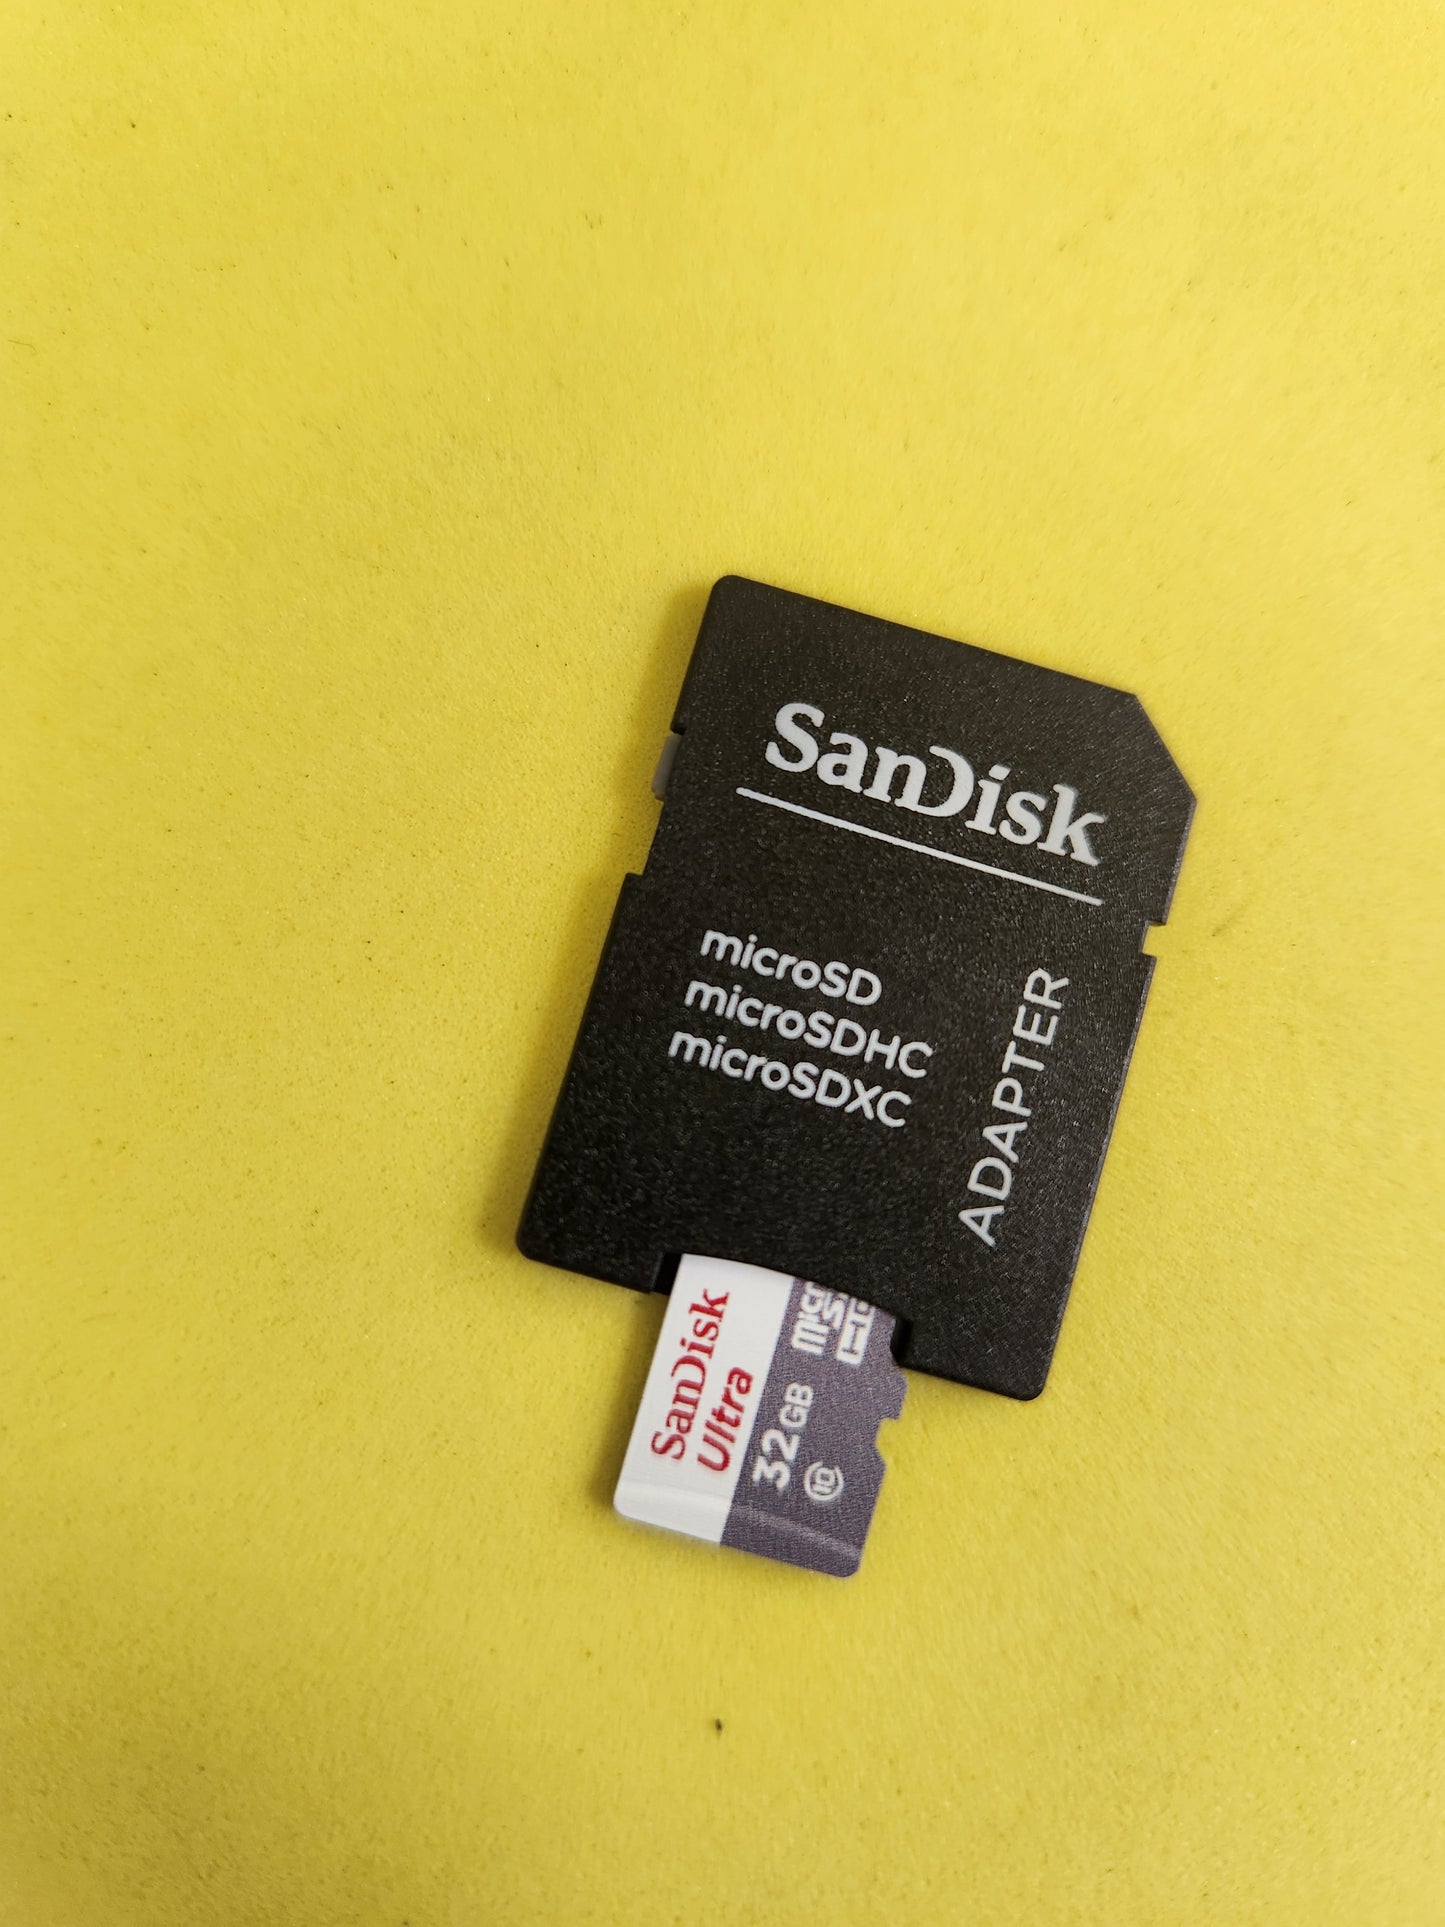 32gb SanDisk card with adapter